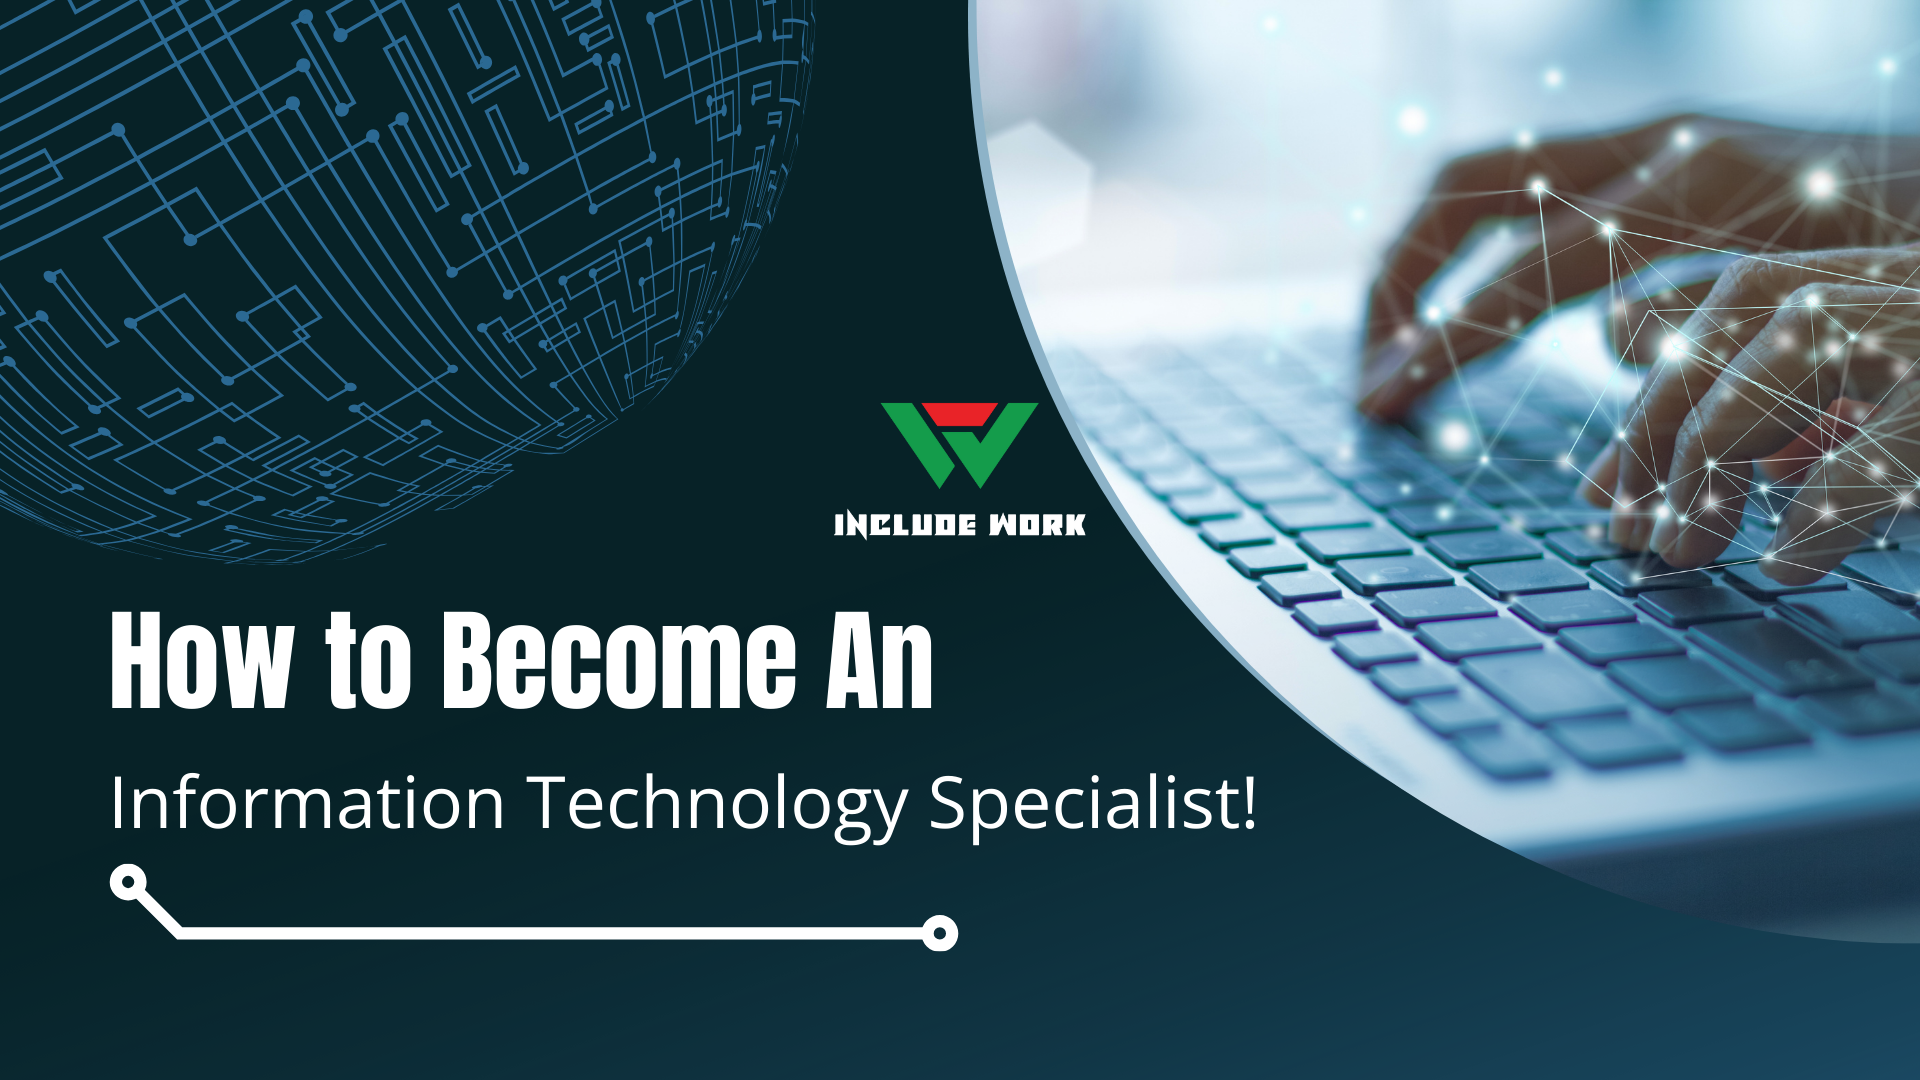 How to Become an Information Technology Specialist